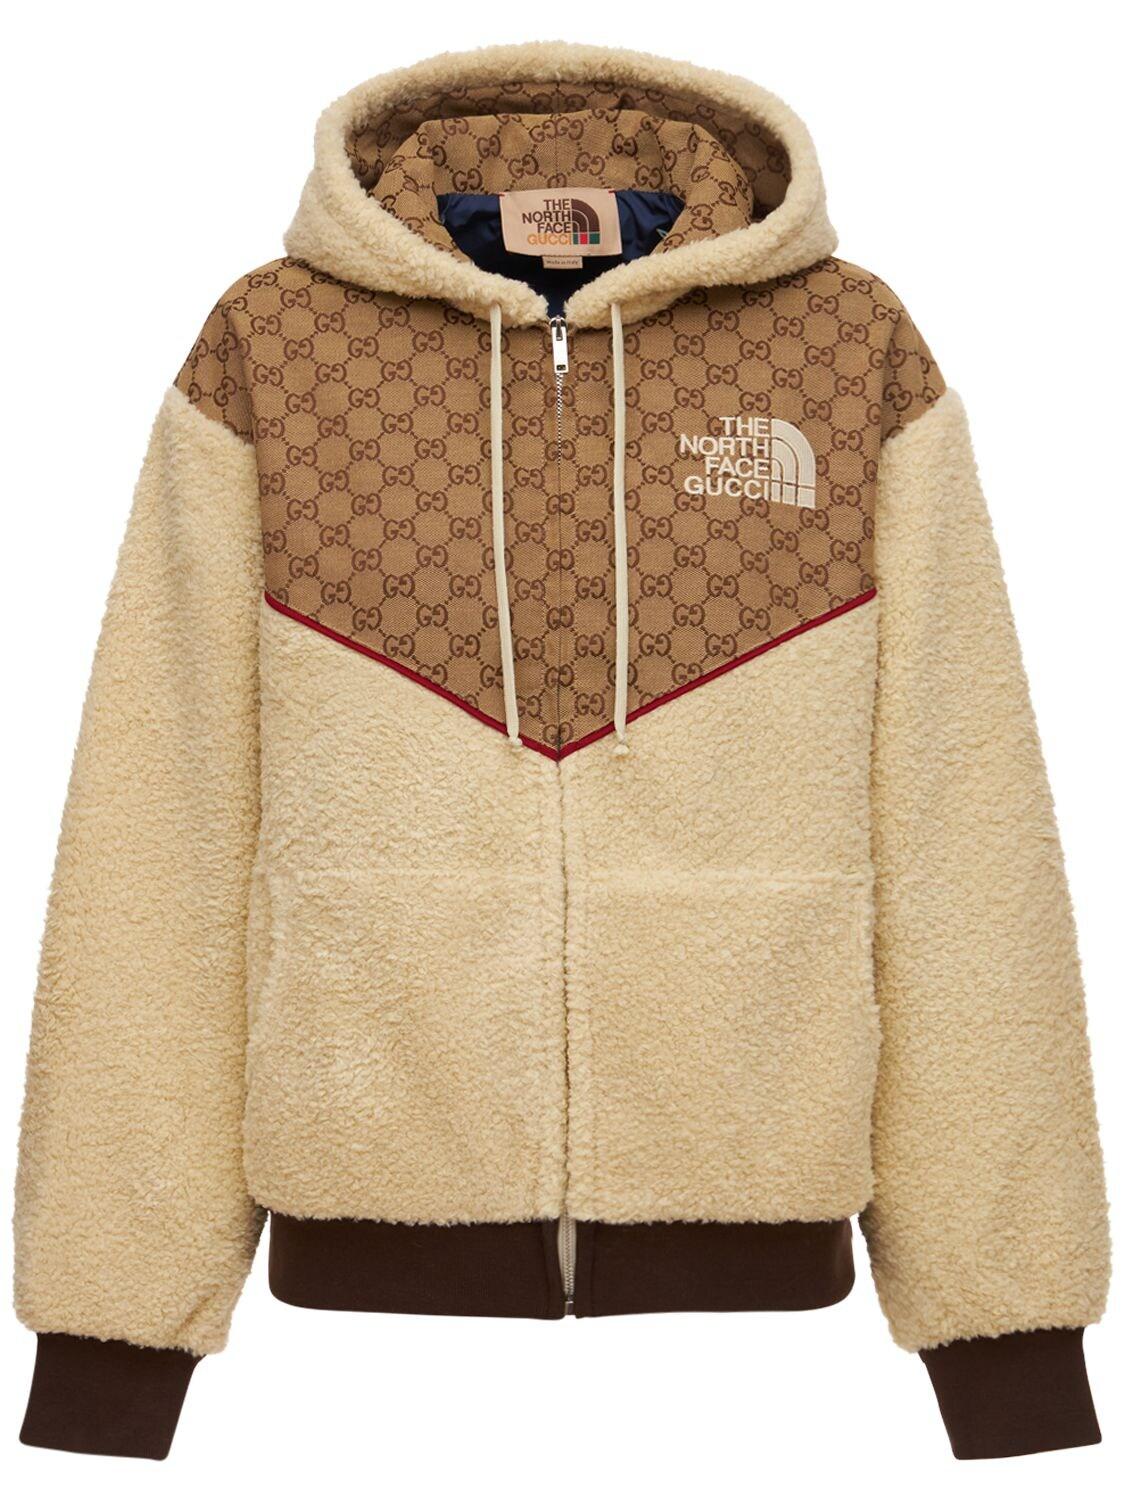 Gucci X The North Face Canvas Logo Zip Jacket in Natural | Lyst